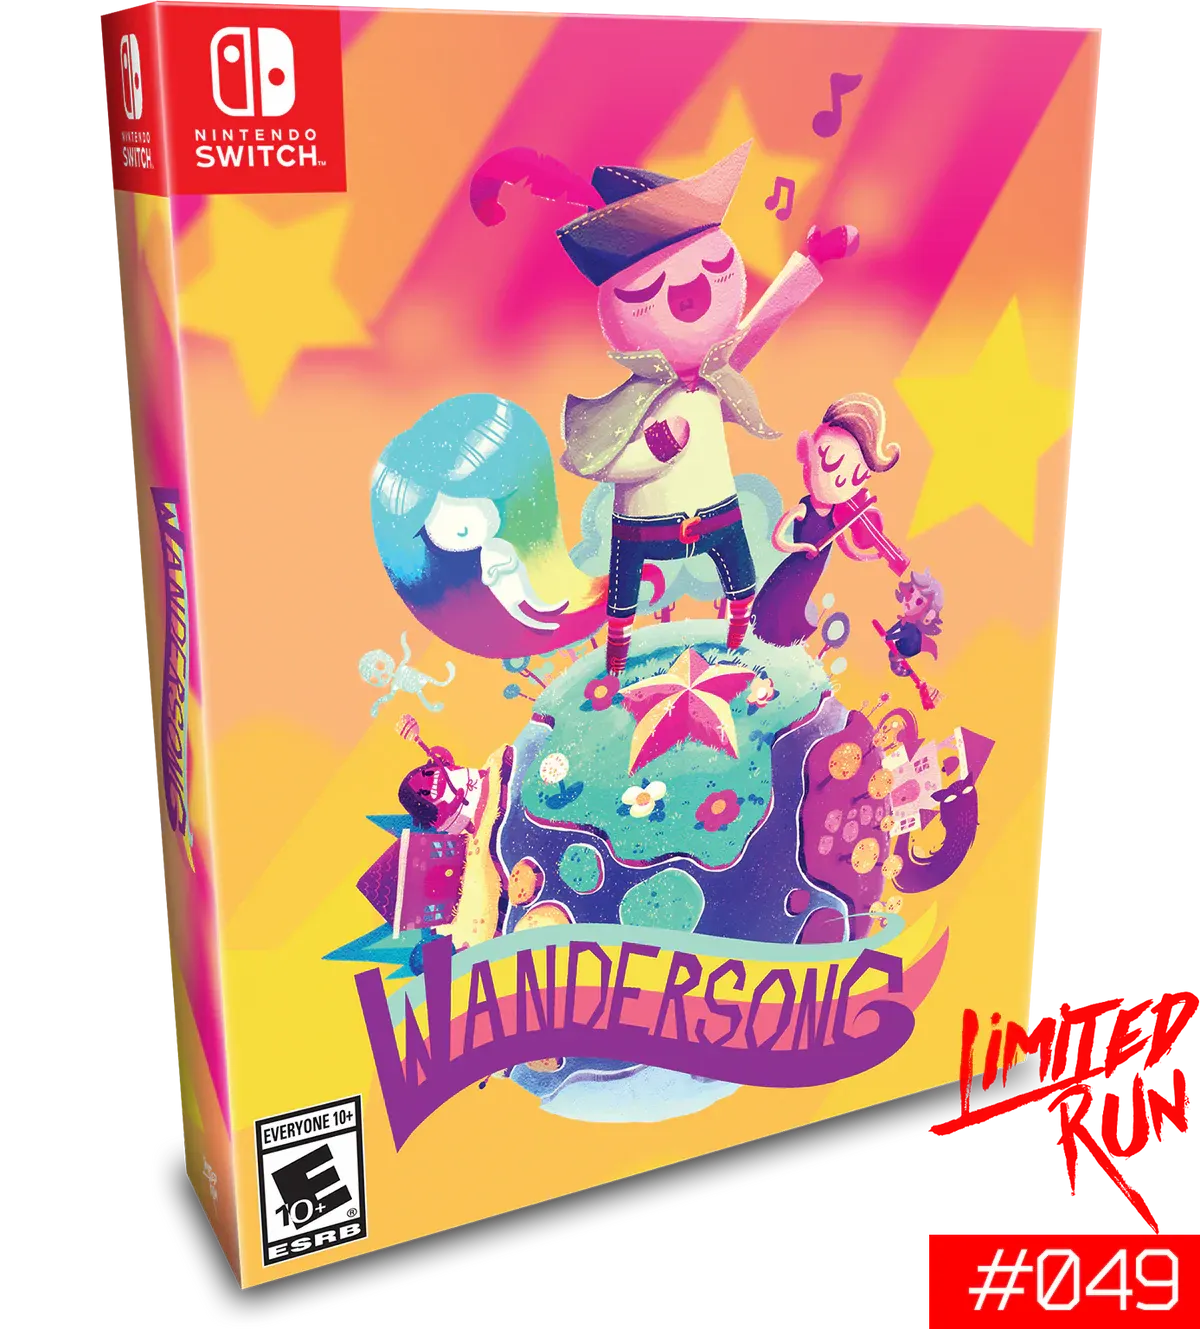 Wandersong [Pop-Up Edition] Video Game